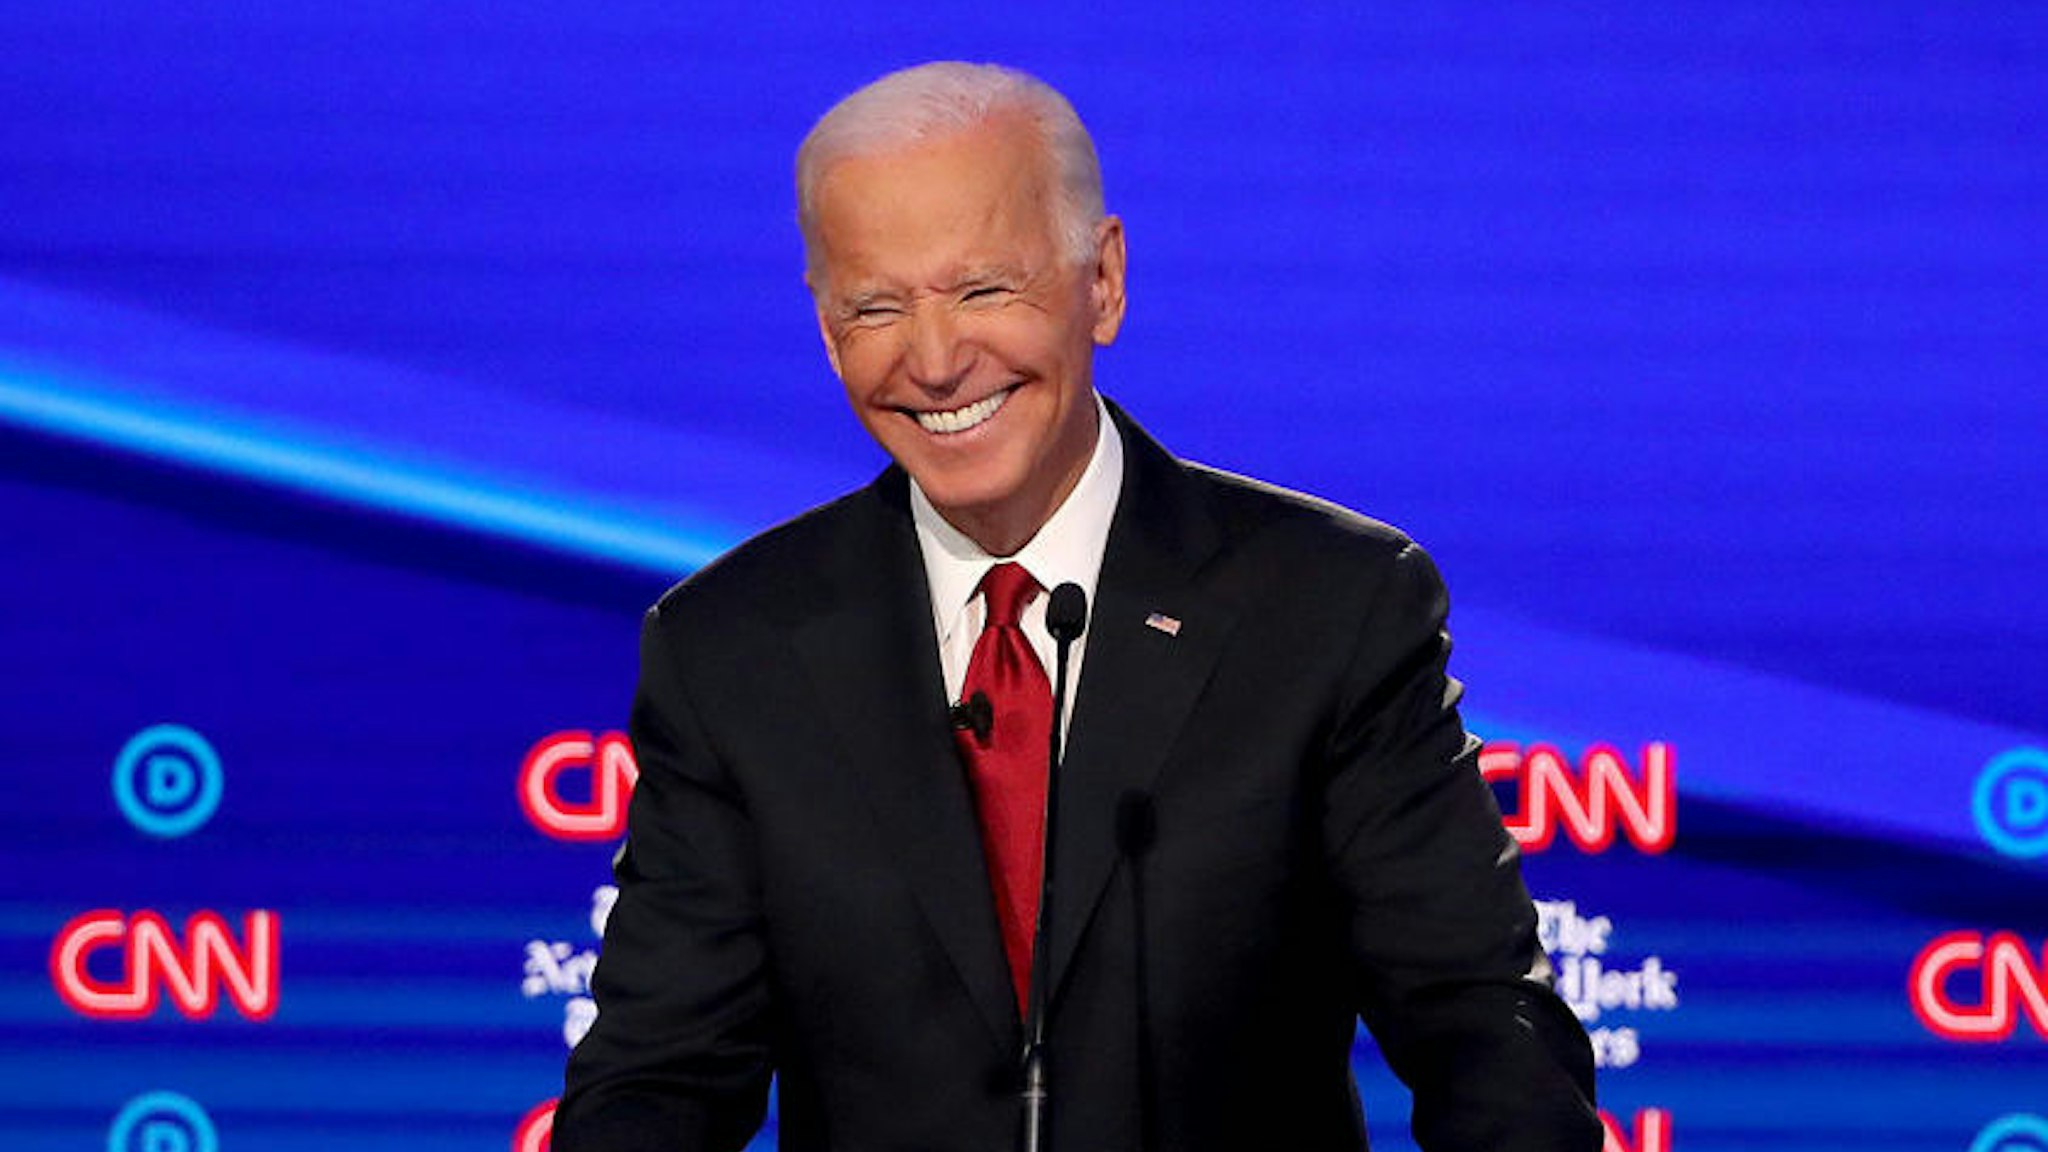 WESTERVILLE, OHIO - OCTOBER 15: Former Vice President Joe Biden smiles during the Democratic Presidential Debate at Otterbein University on October 15, 2019 in Westerville, Ohio. A record 12 presidential hopefuls are participating in the debate hosted by CNN and The New York Times.